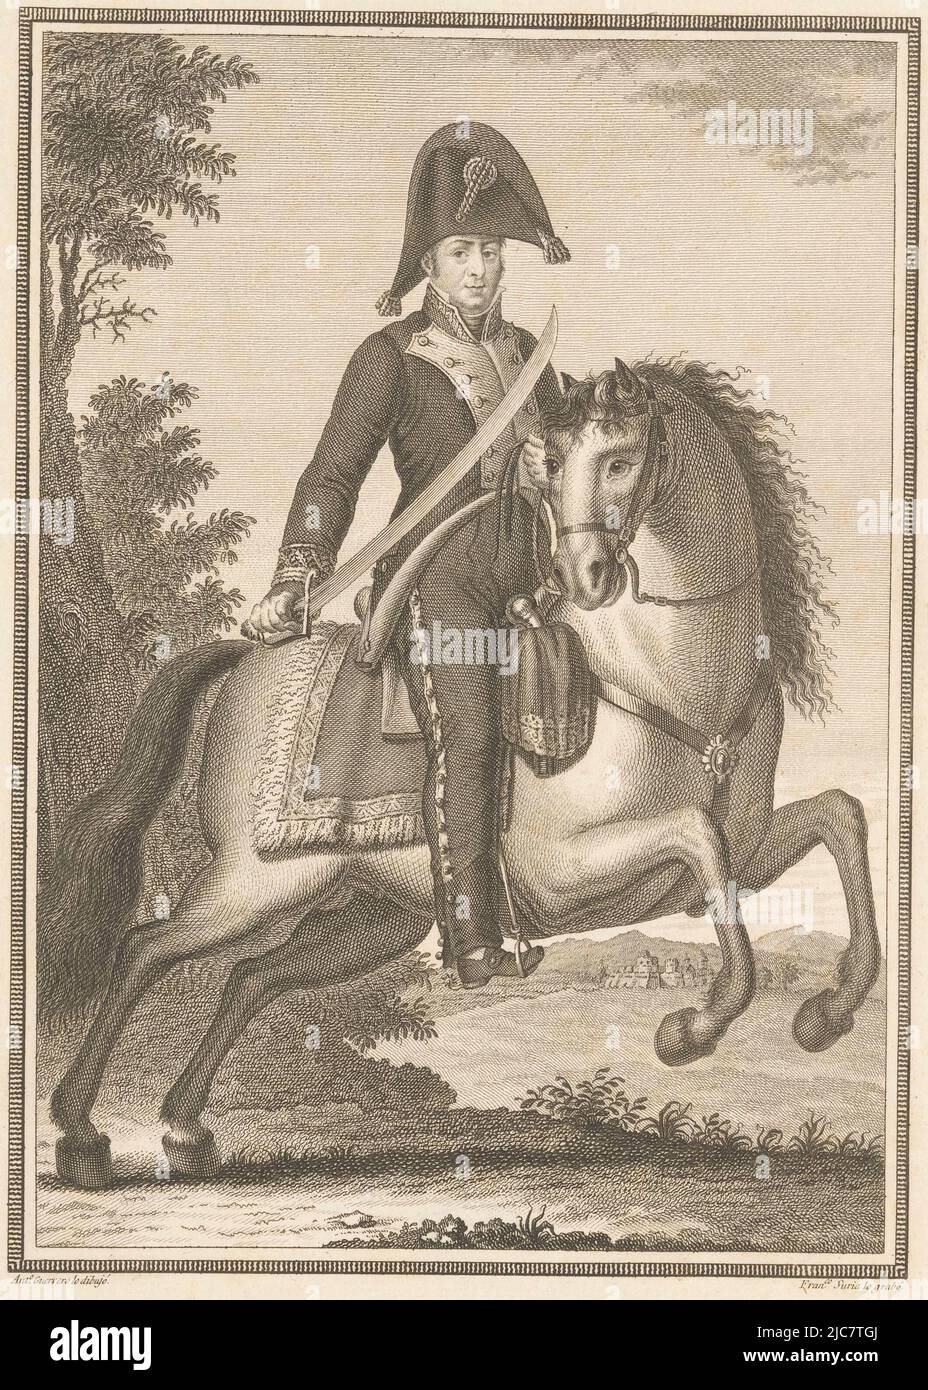 Equestrian portrait of Francisco Robira, print maker: Francisco Suría, (mentioned on object), intermediary draughtsman: Antonio Guerrero, (mentioned on object), Spain, 1797 - 1836, paper, etching, h 291 mm × w 188 mm Stock Photo